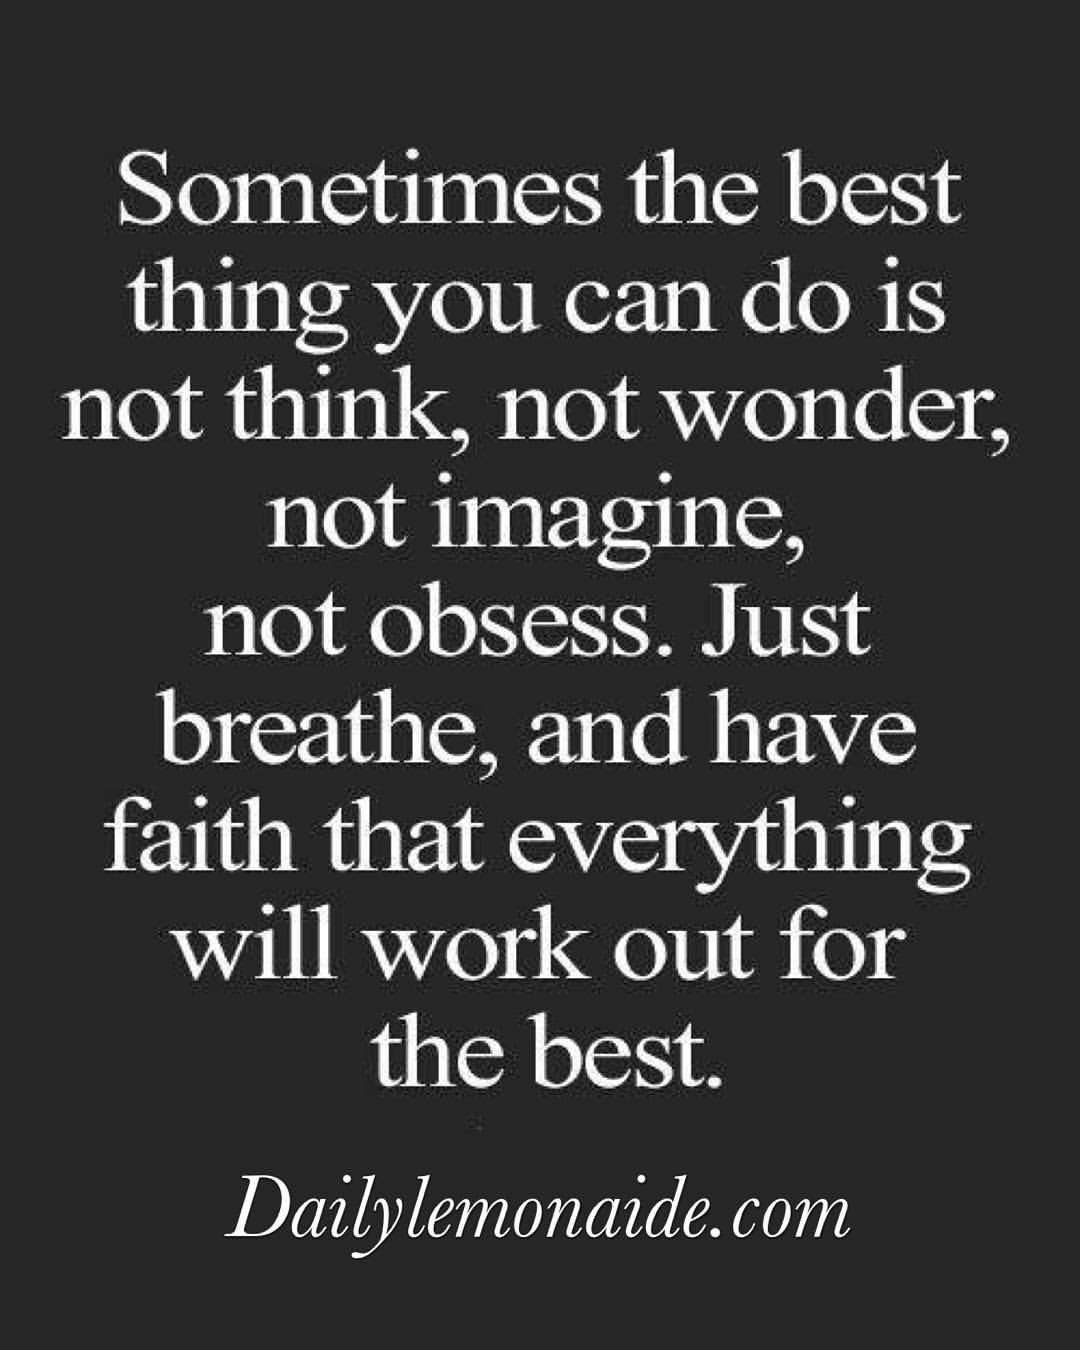 sometimes the best thing you can do is not thing, not wonder not imagine, not obsess. just breathe and have faith that everything will work out for the best.